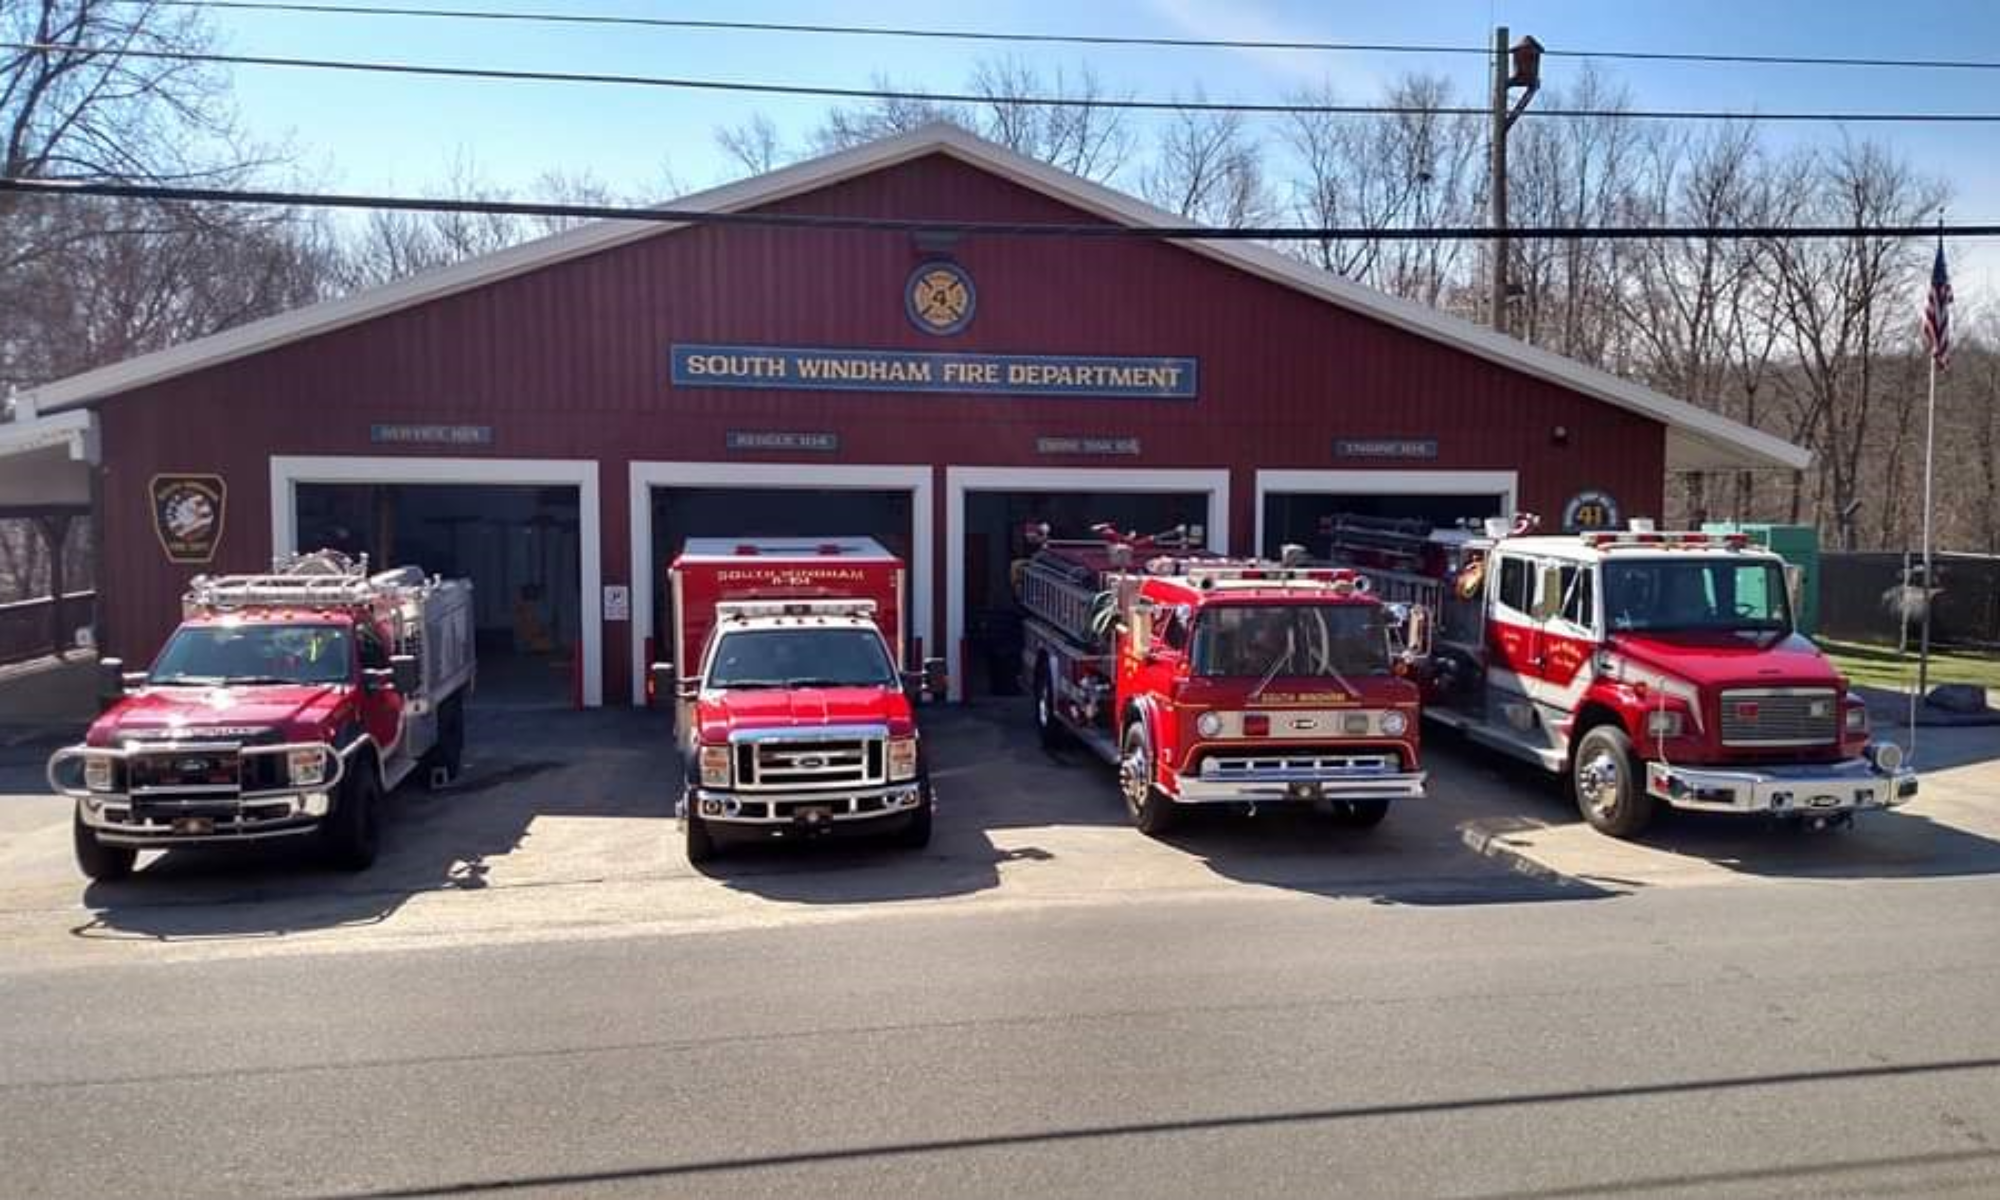 South Windham Fire Department